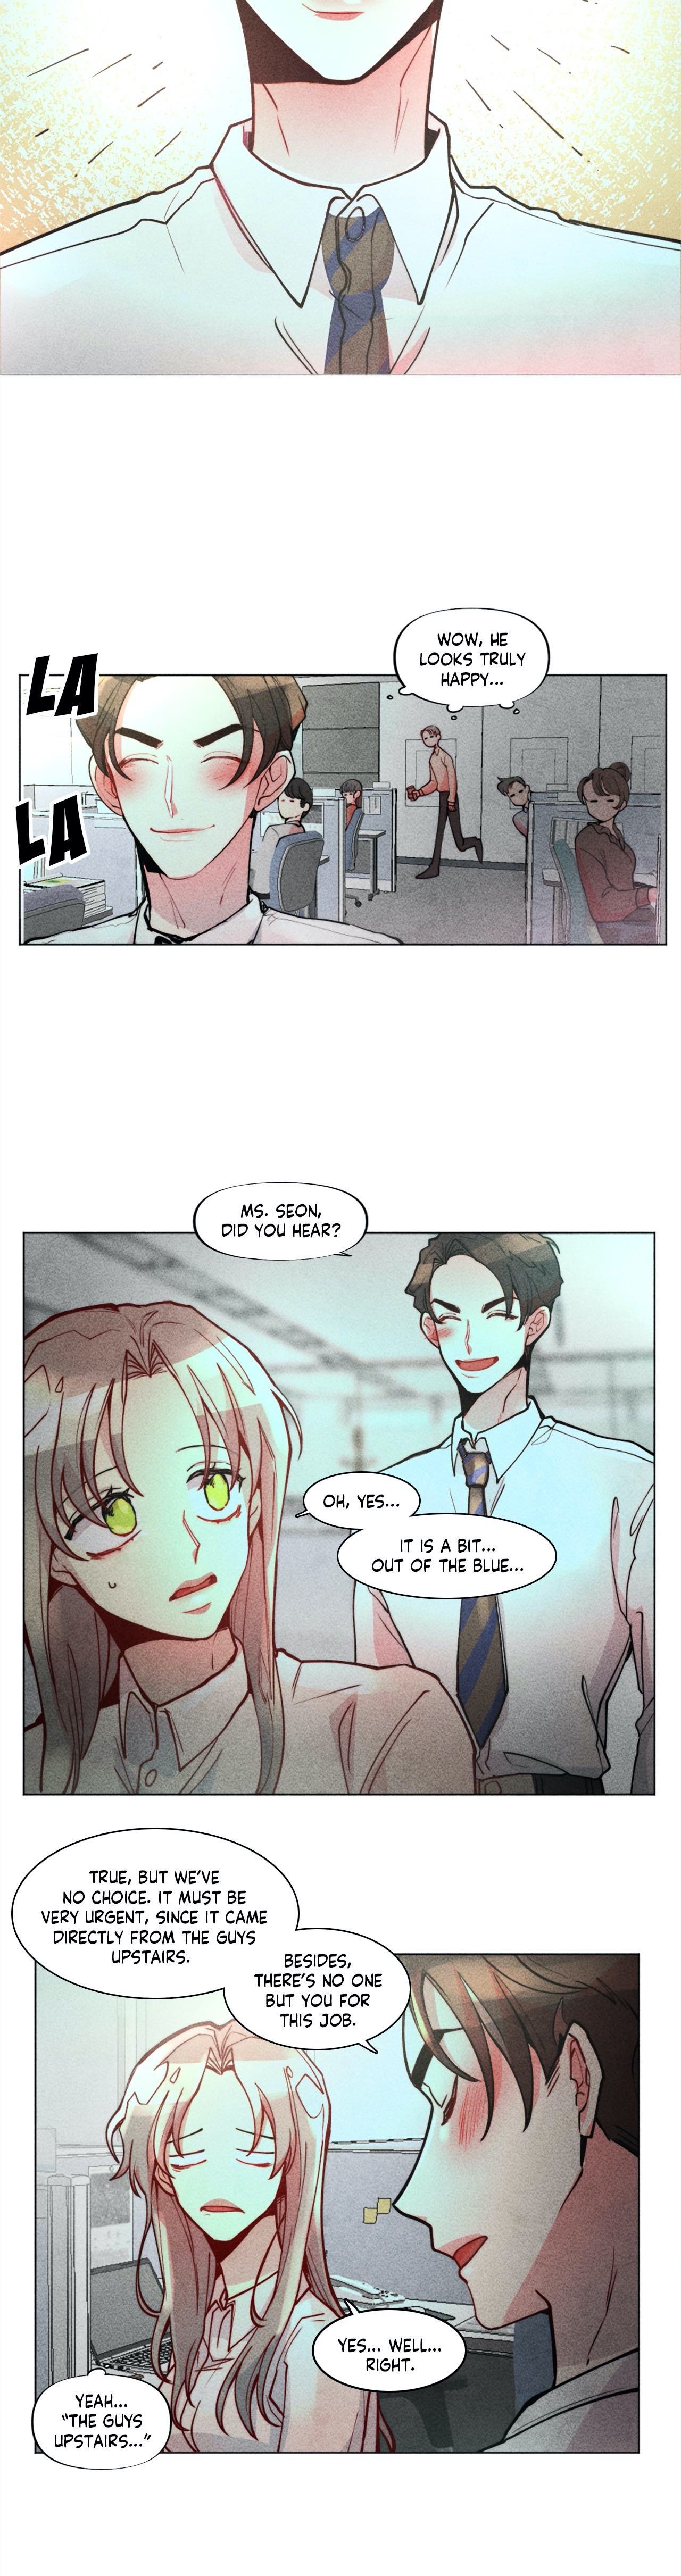 the-virgin-witch-chap-39-11